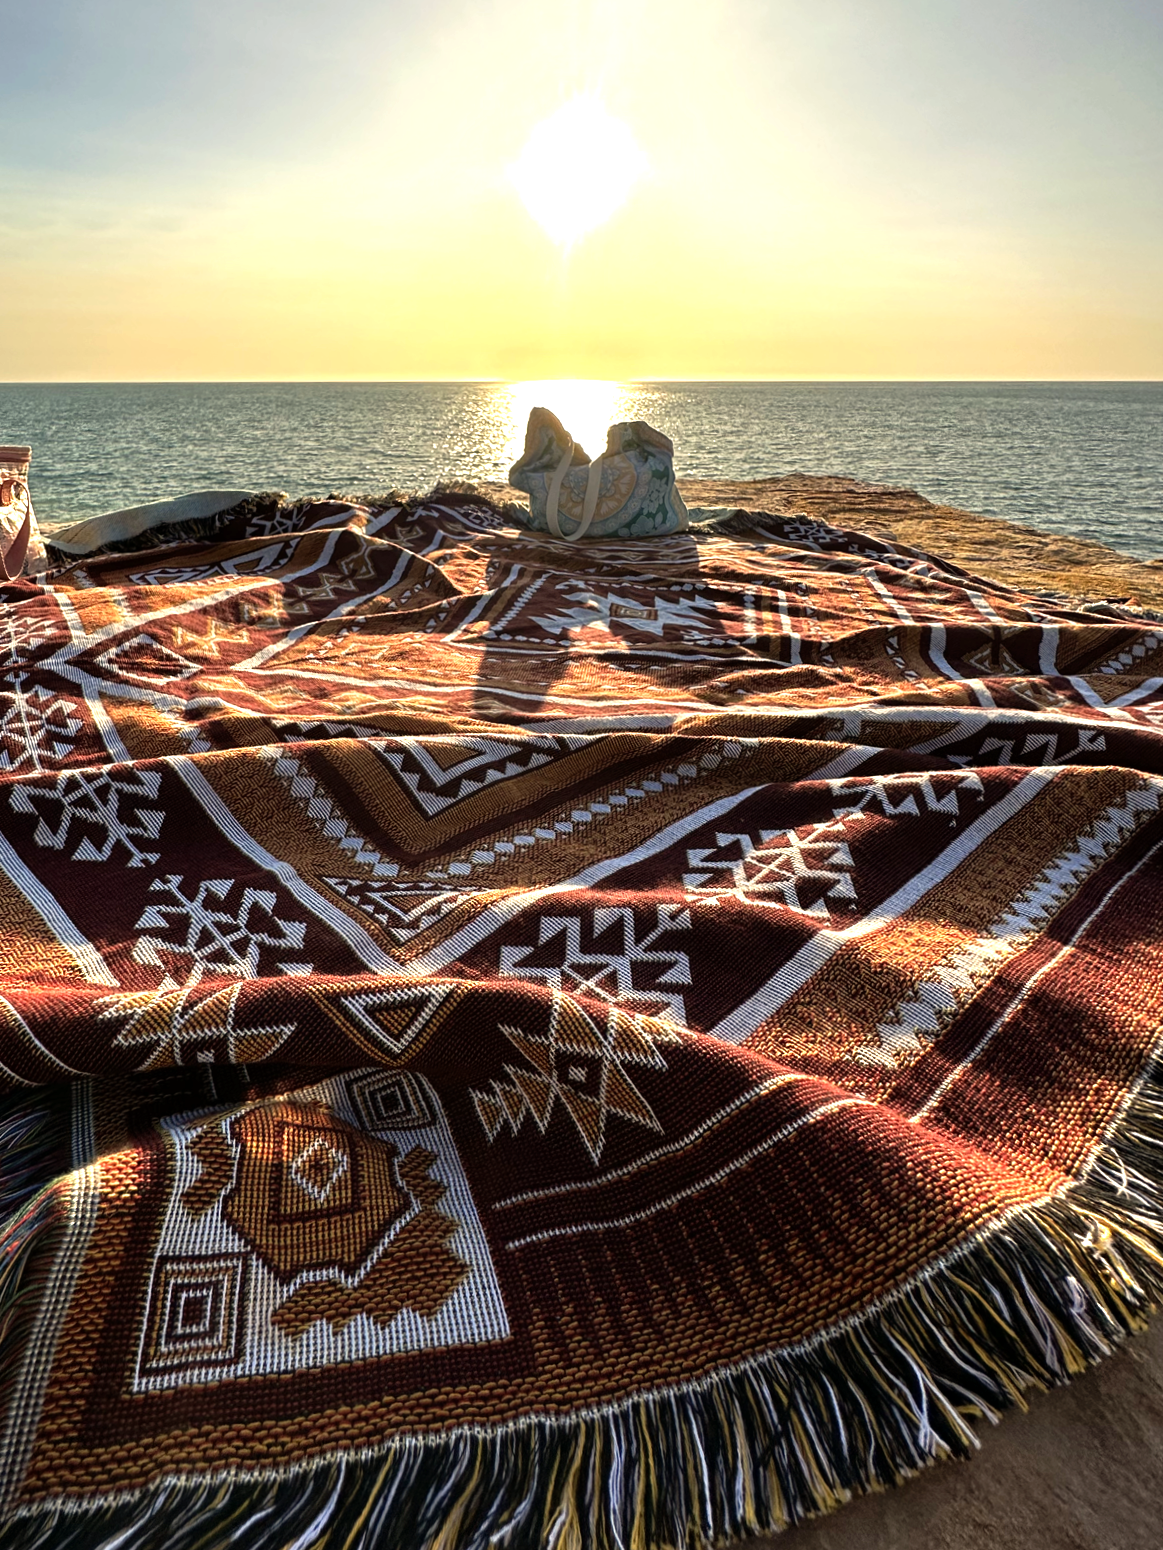 Desert Night throw rug and picnic blanket watching sunset over the ocean. Shades of brown, boho rug, must-have van life accessory. Designed in Australia for adventure.